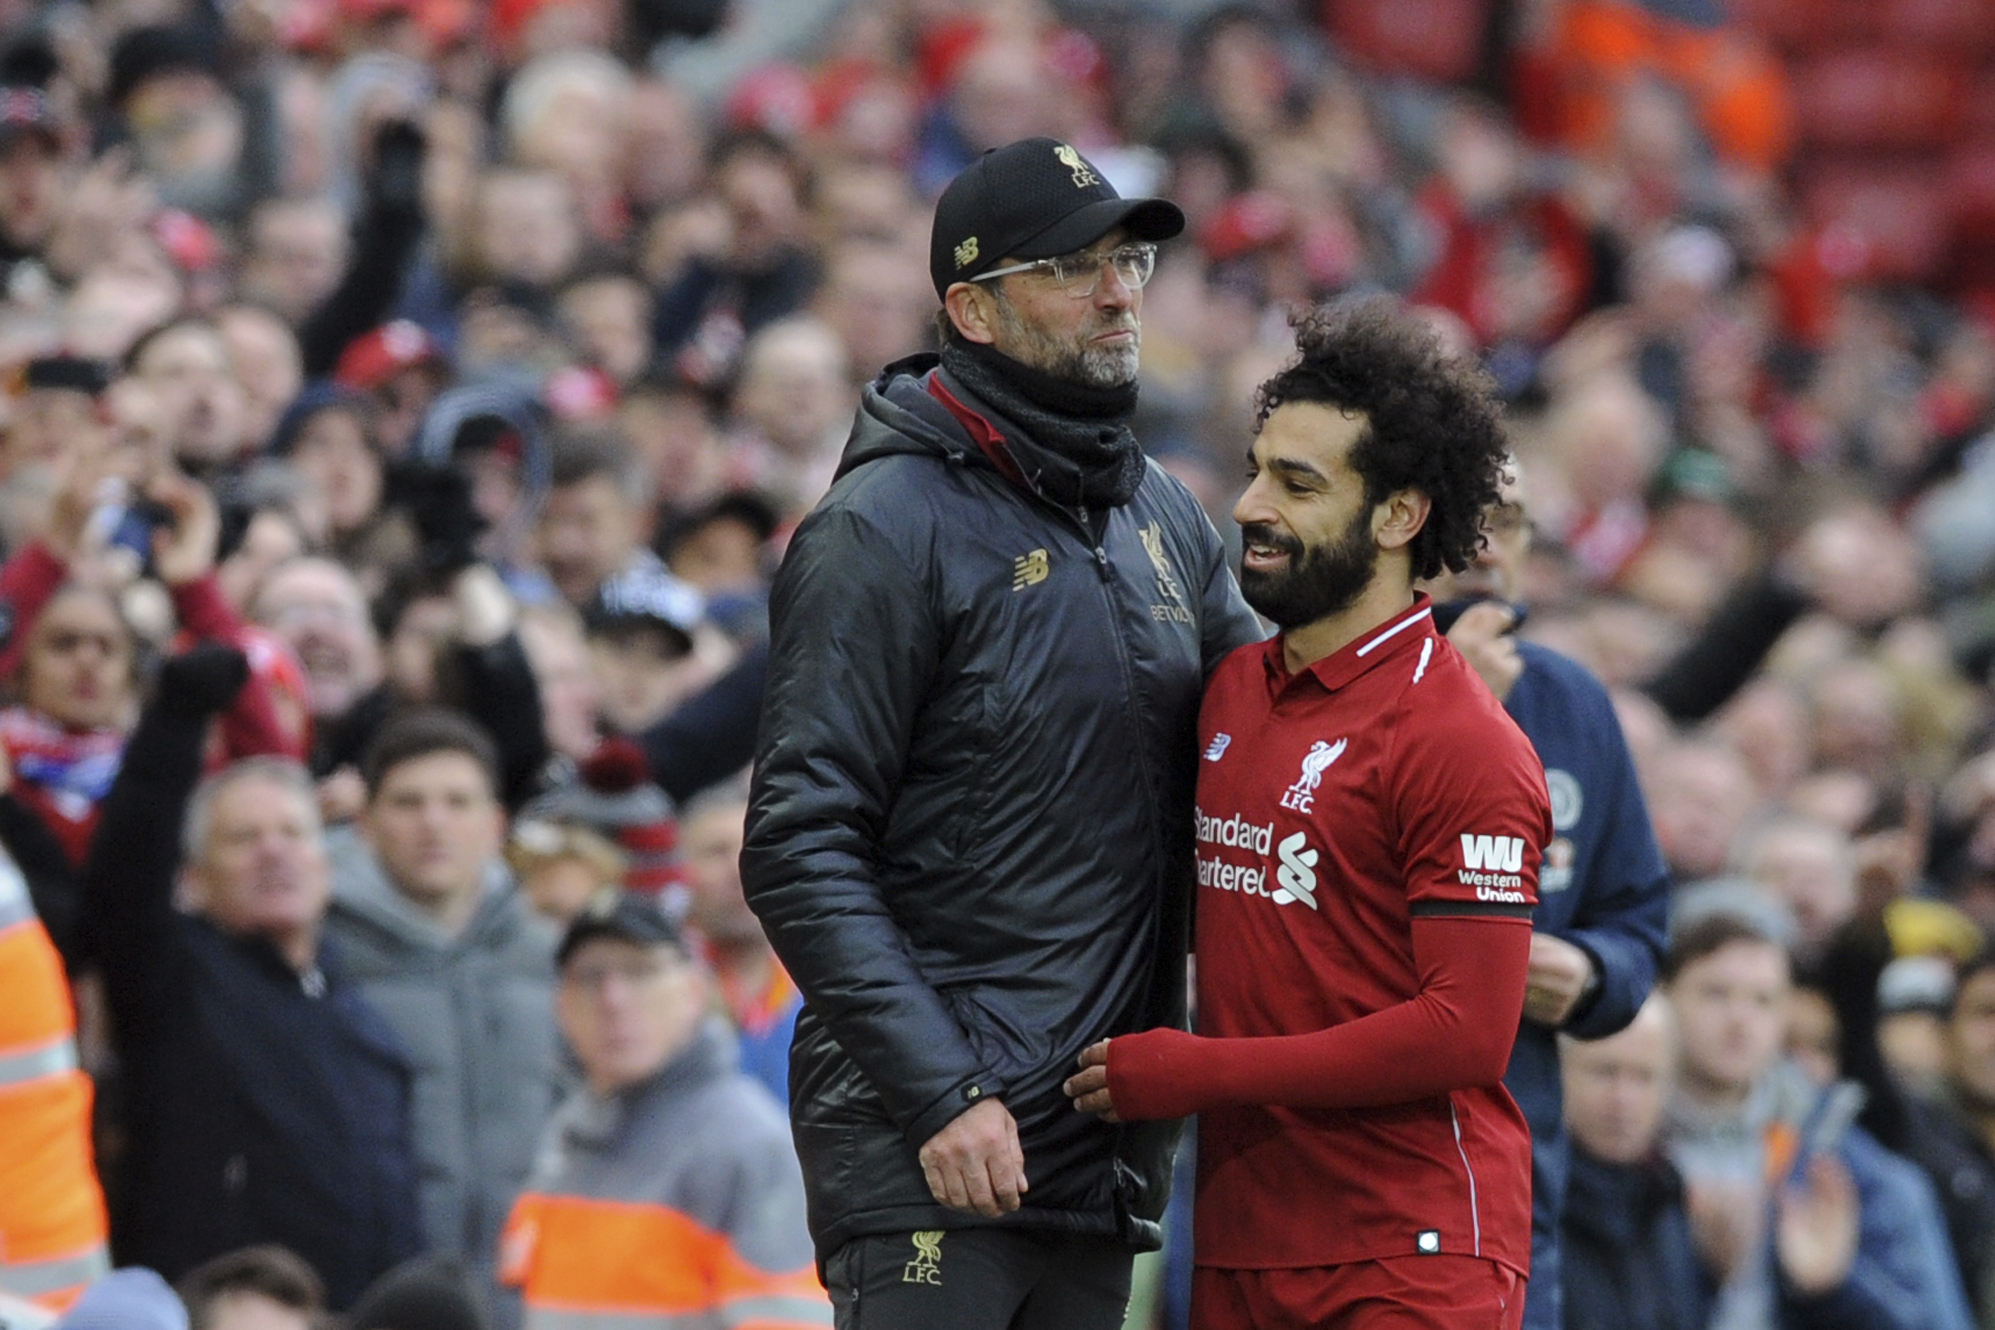 Mohamed Salah's Rep Ramy Abbas Issa Shoots Down Spanish Liverpool Exit Claims | Bleacher Report | Latest News, Videos and Highlights